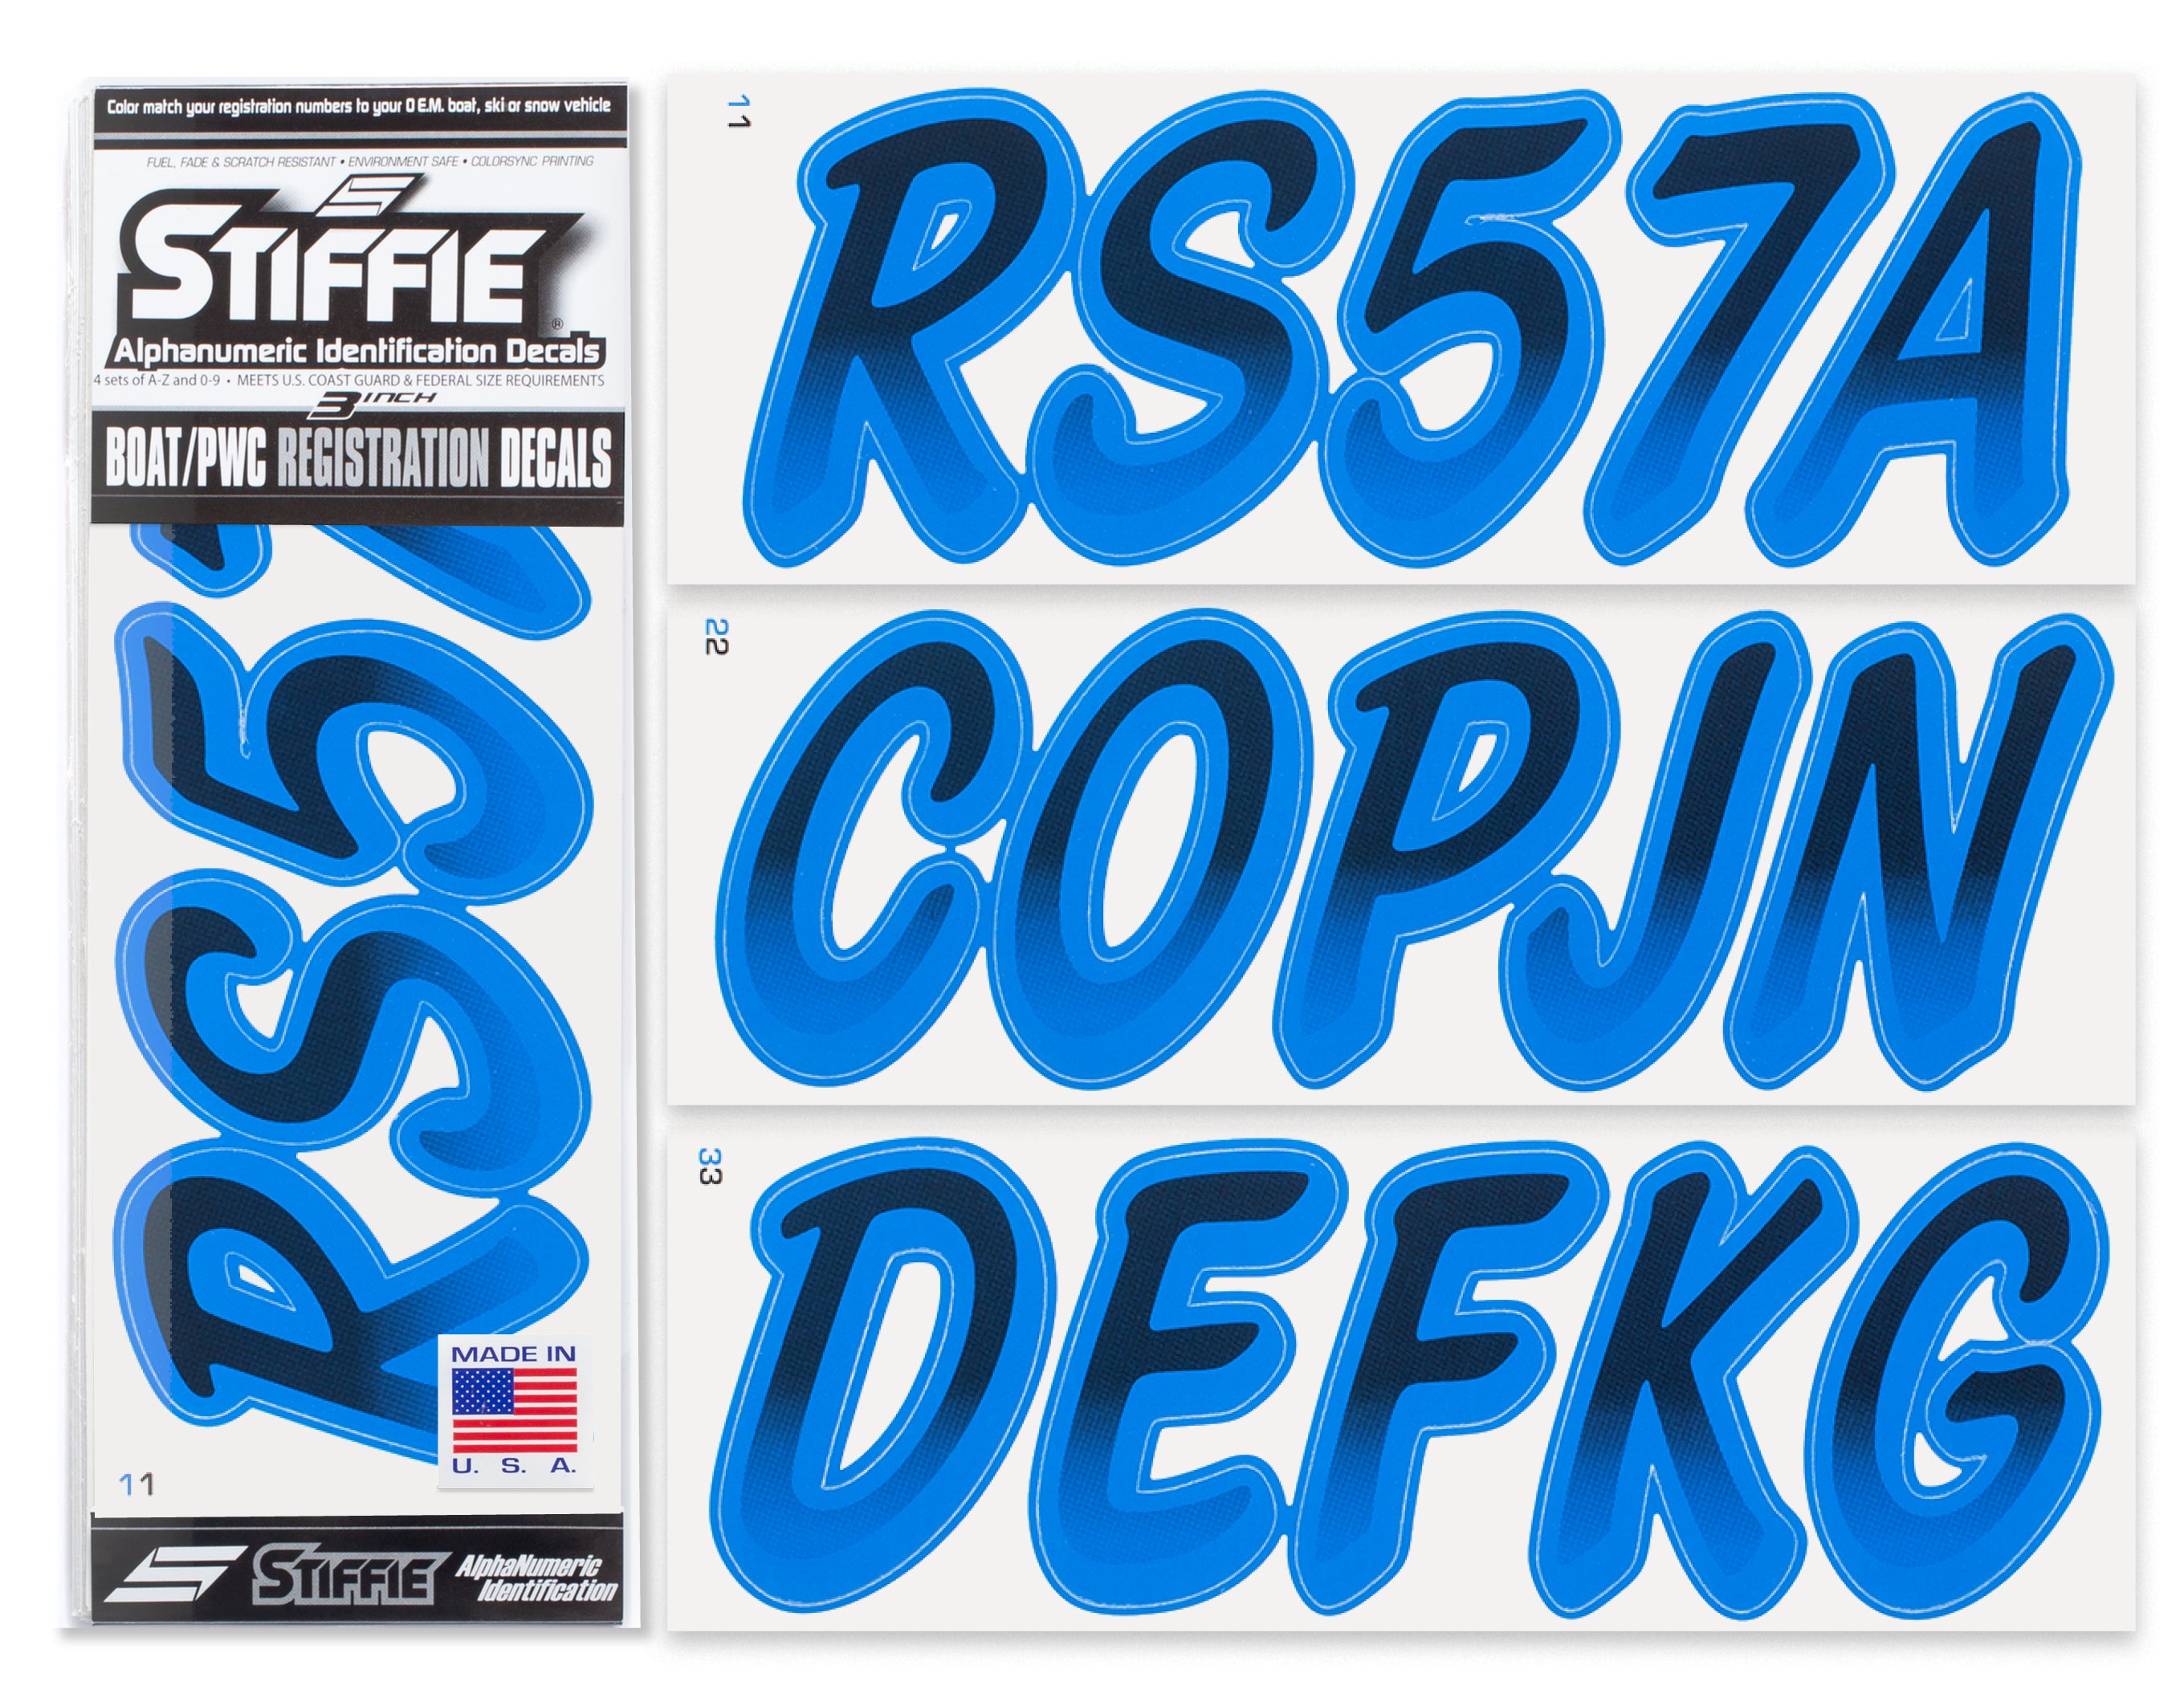 STIFFIE Whipline Black/Octane 3" Alpha-Numeric Registration Identification Numbers Stickers Decals for Boats & Personal Watercraft